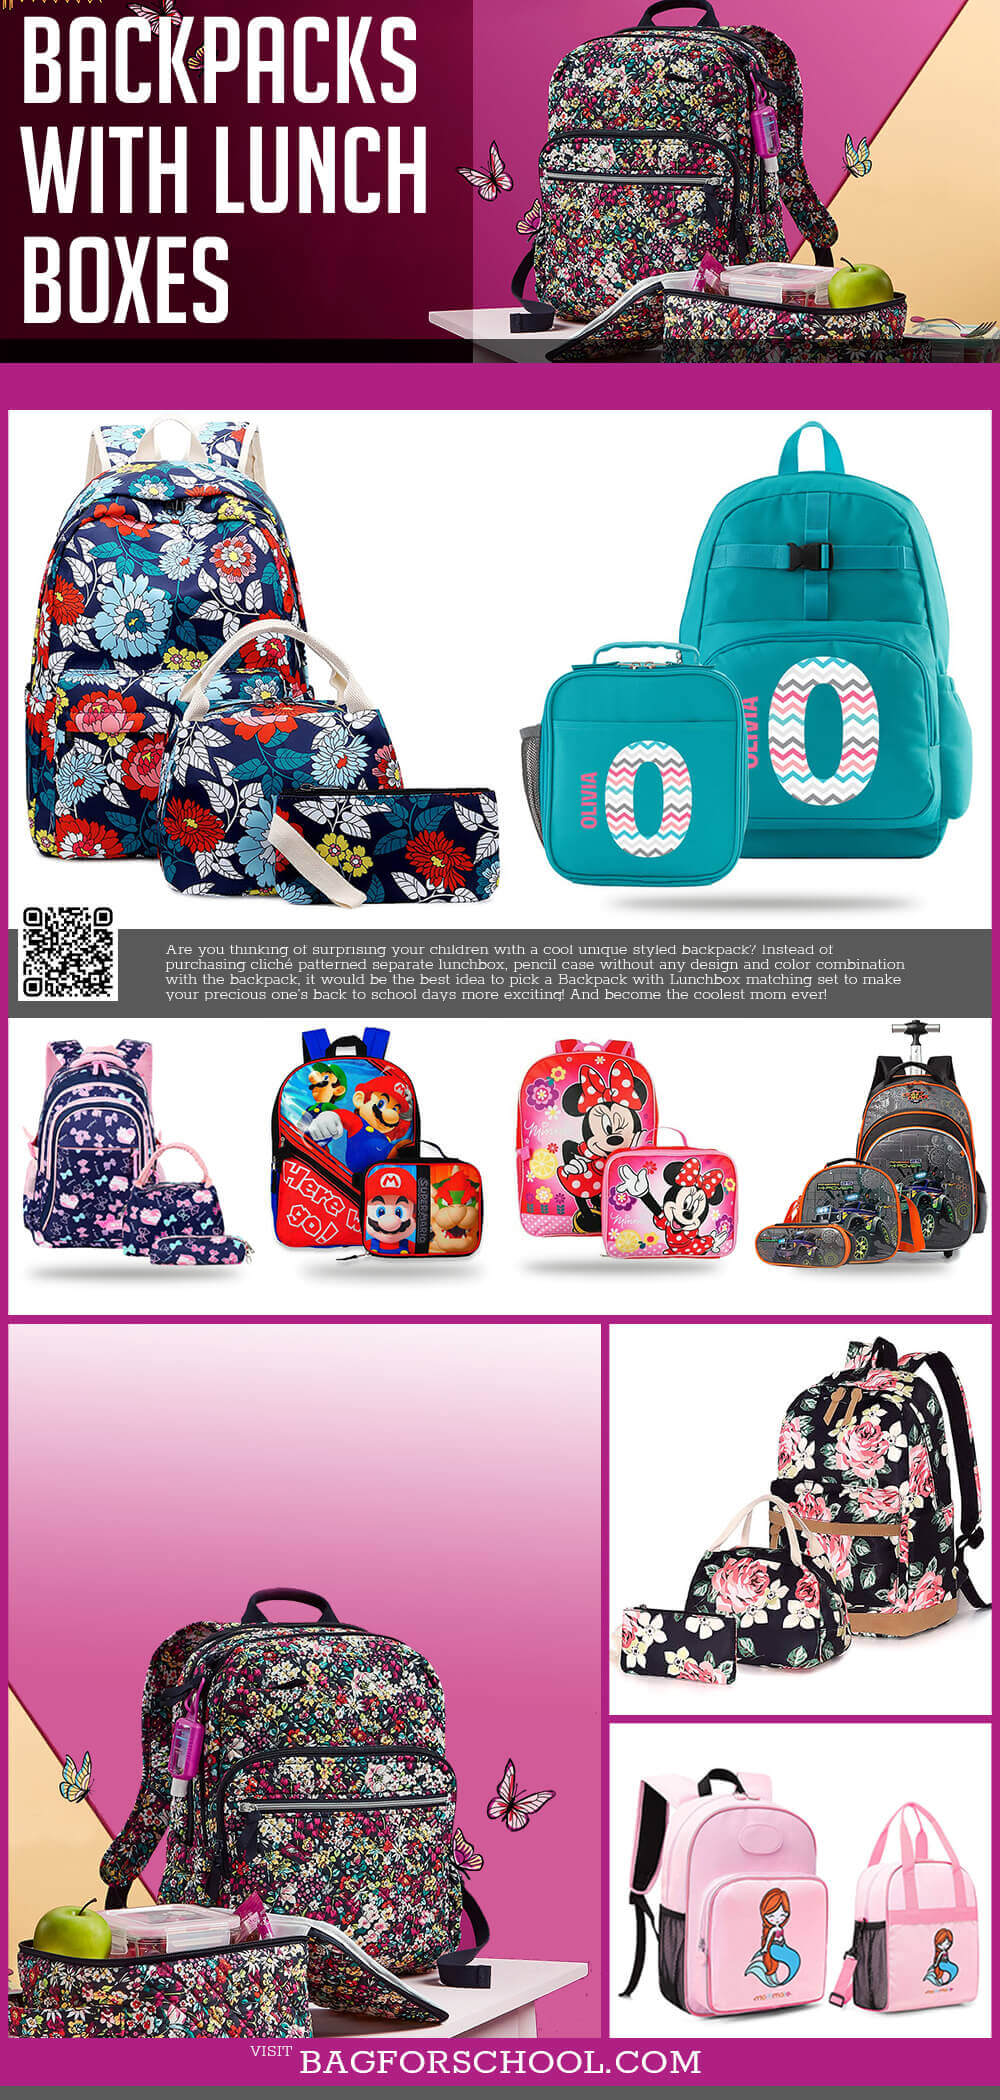 Backpacks With Lunch Boxes